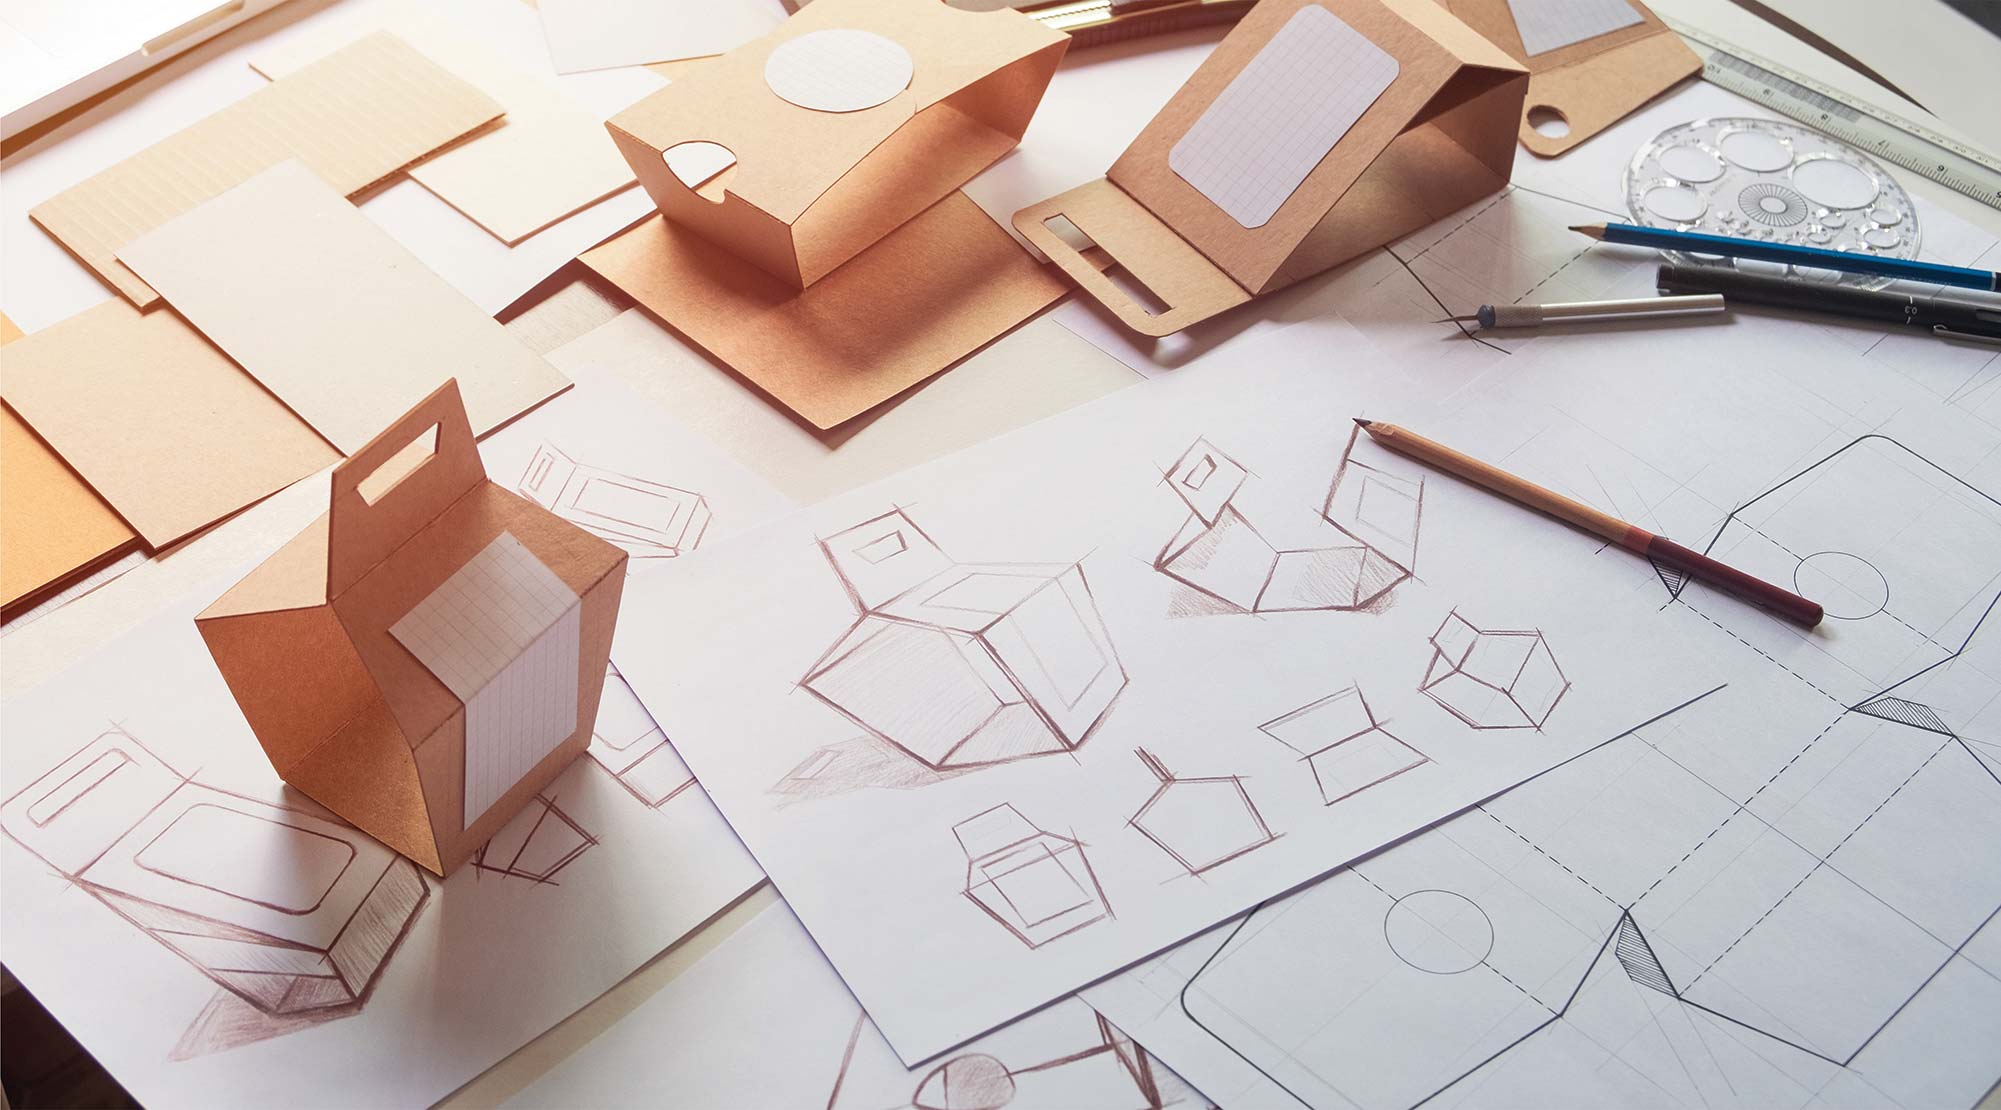 How Packaging Can Tell Your Brand Story